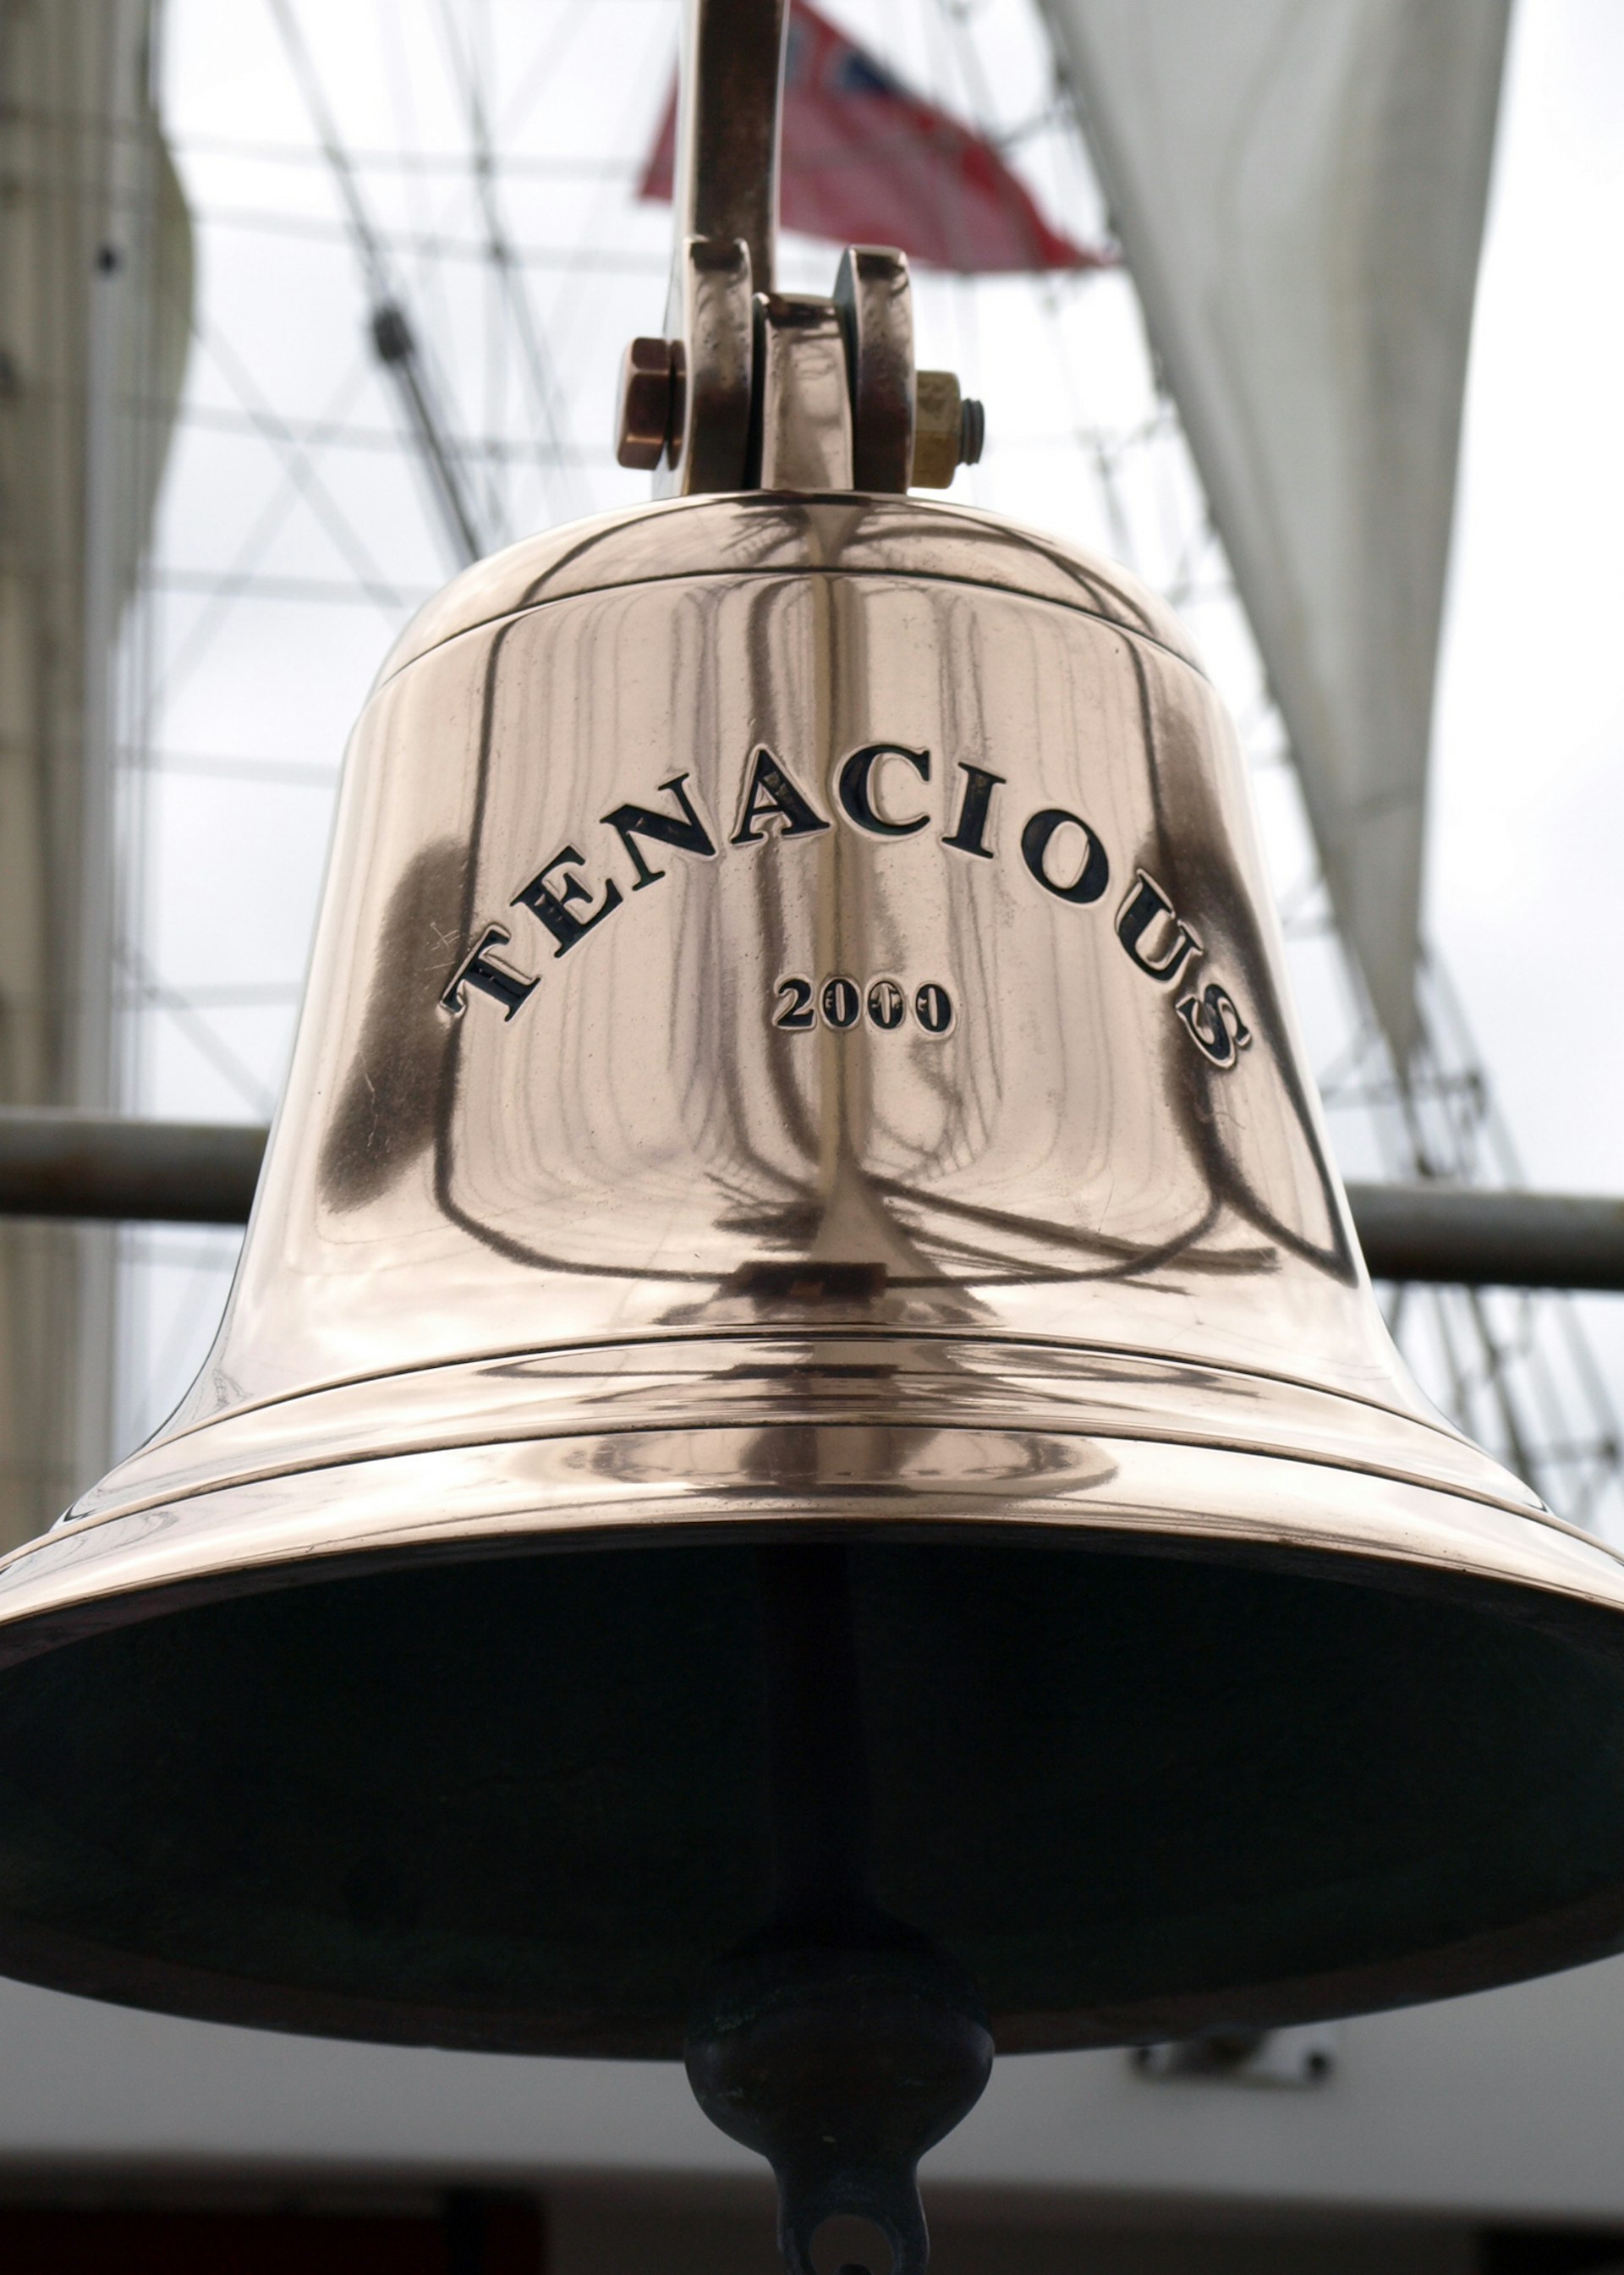 The brass bell of the SV Tenacious / Image supplied by Martin Heng